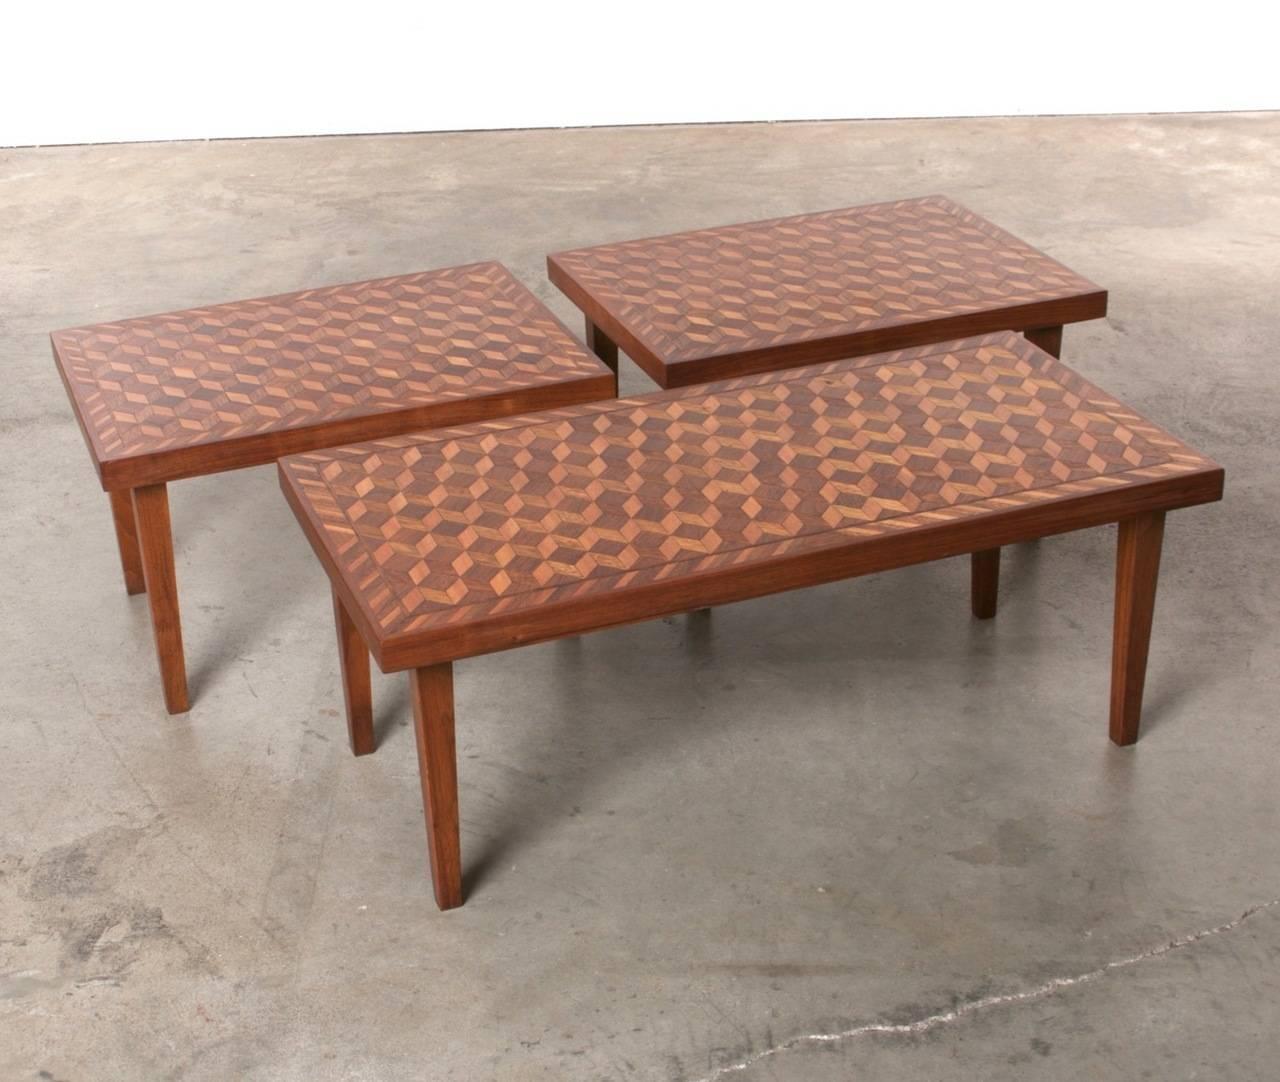 Handmade Geometric coffee table and side table set in the style of M. C. Escher. Three different woods, hand-cut marquetry, meticulous attention to detail. Angular legs taper to the floor offering sturdy support. Escher's trademark optical illusions